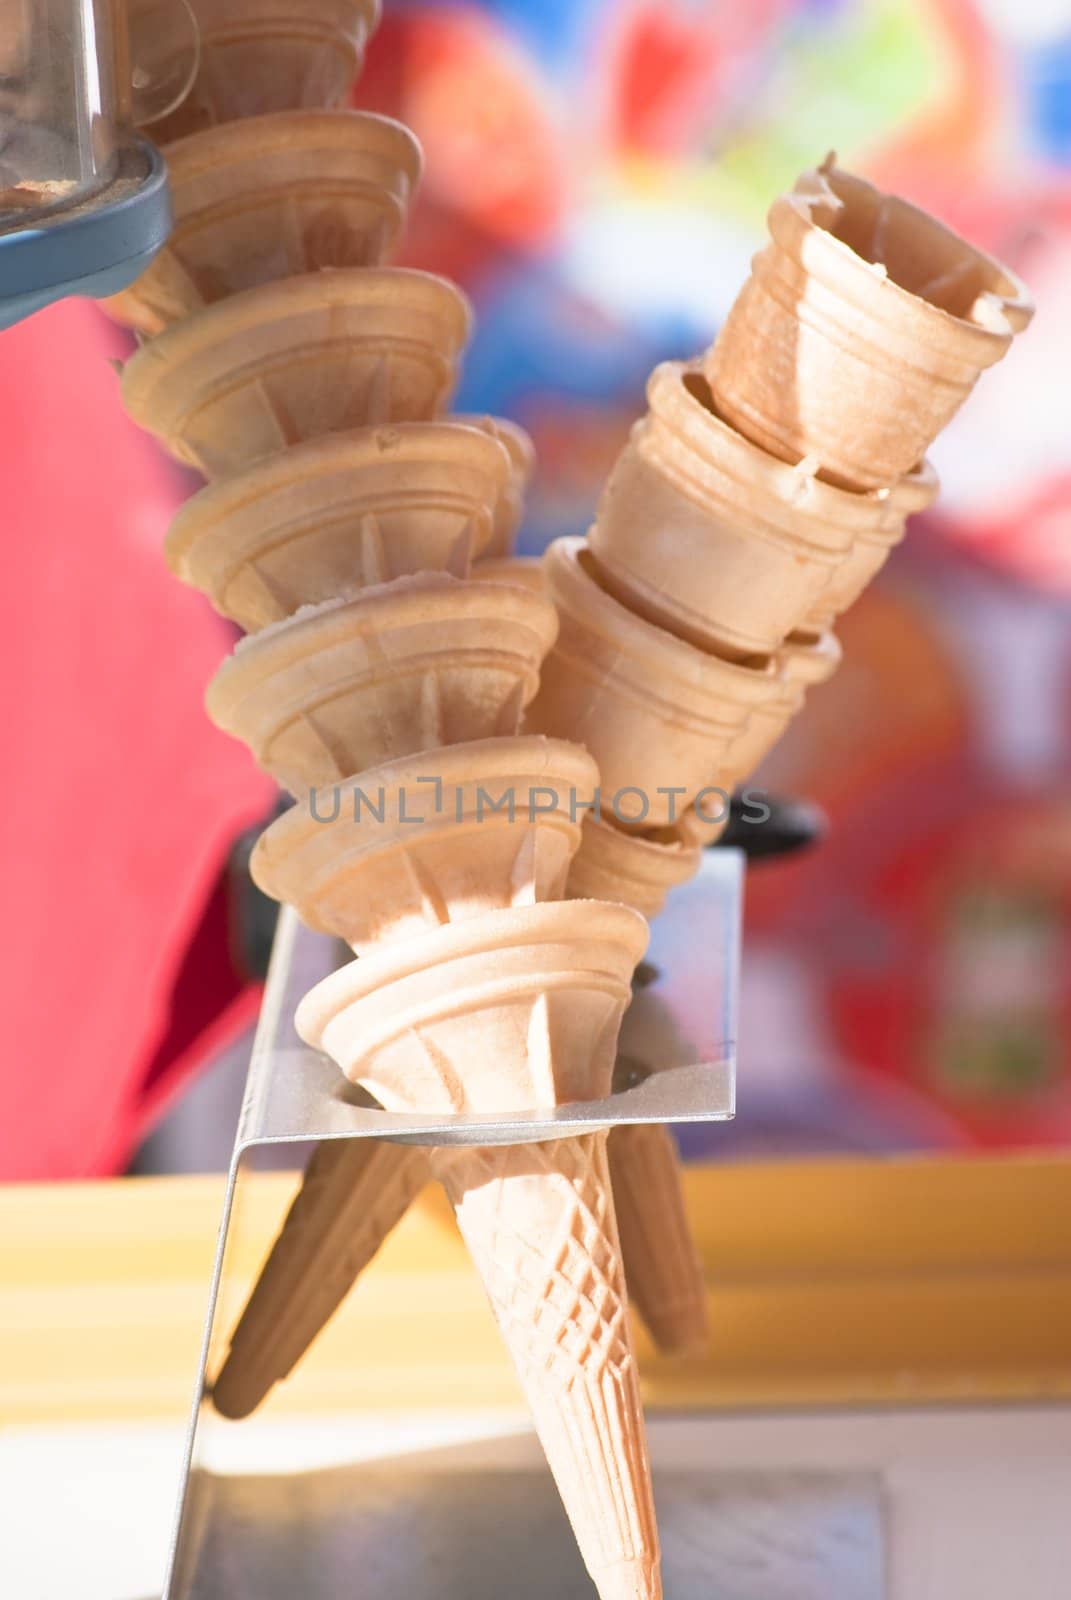 Single and double ice cream cones stacked on a seller's ice cream stand.  A mixture of strong sunlight and cool shade illustrates a hot, sunny day.  Soft focus background of bright colours: red, blue, green, white.